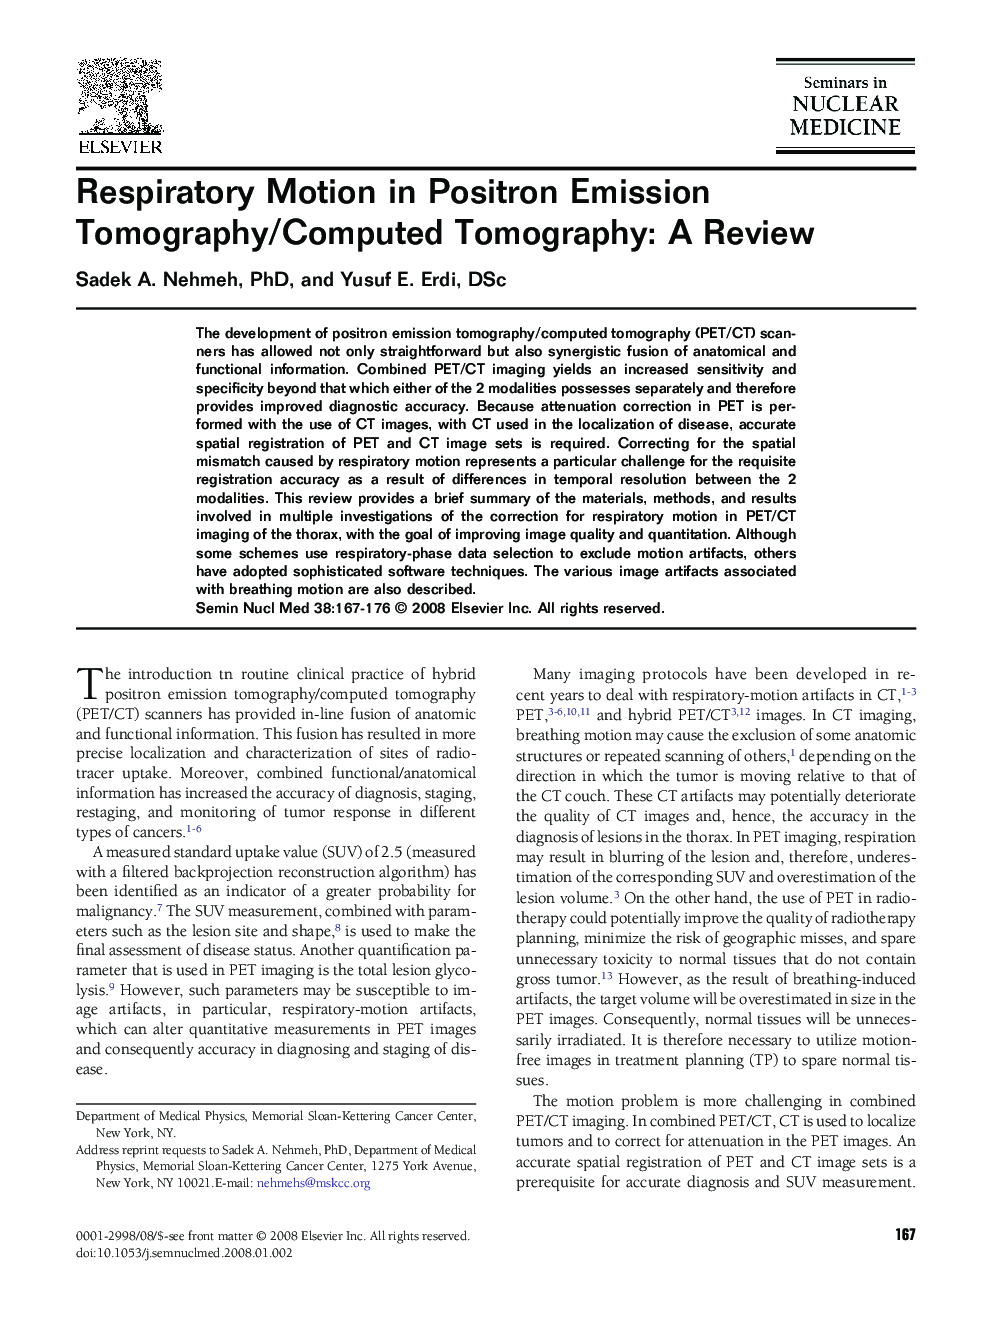 Respiratory Motion in Positron Emission Tomography/Computed Tomography: A Review